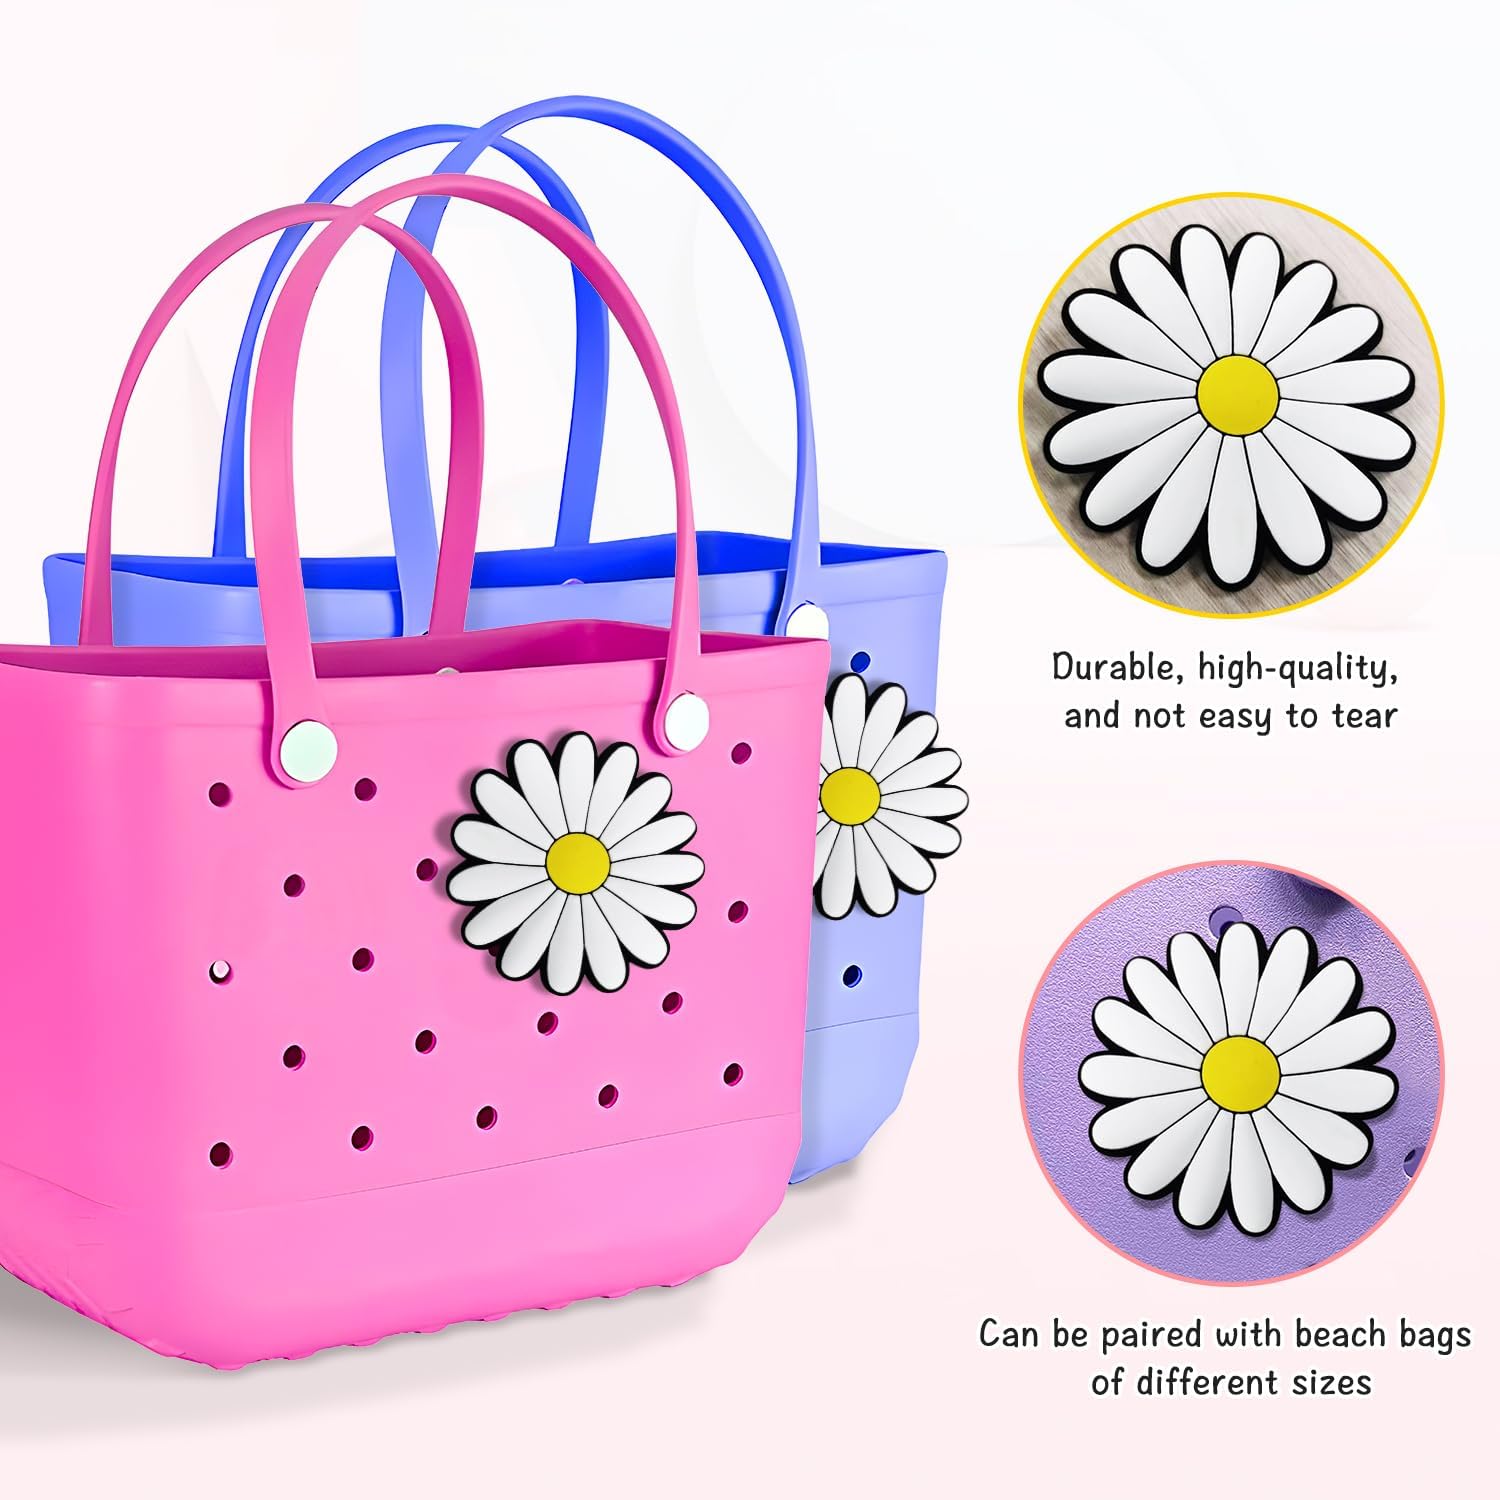 Portable Flower Charm Cup Holder, Drink Cans Bottle Organizer For